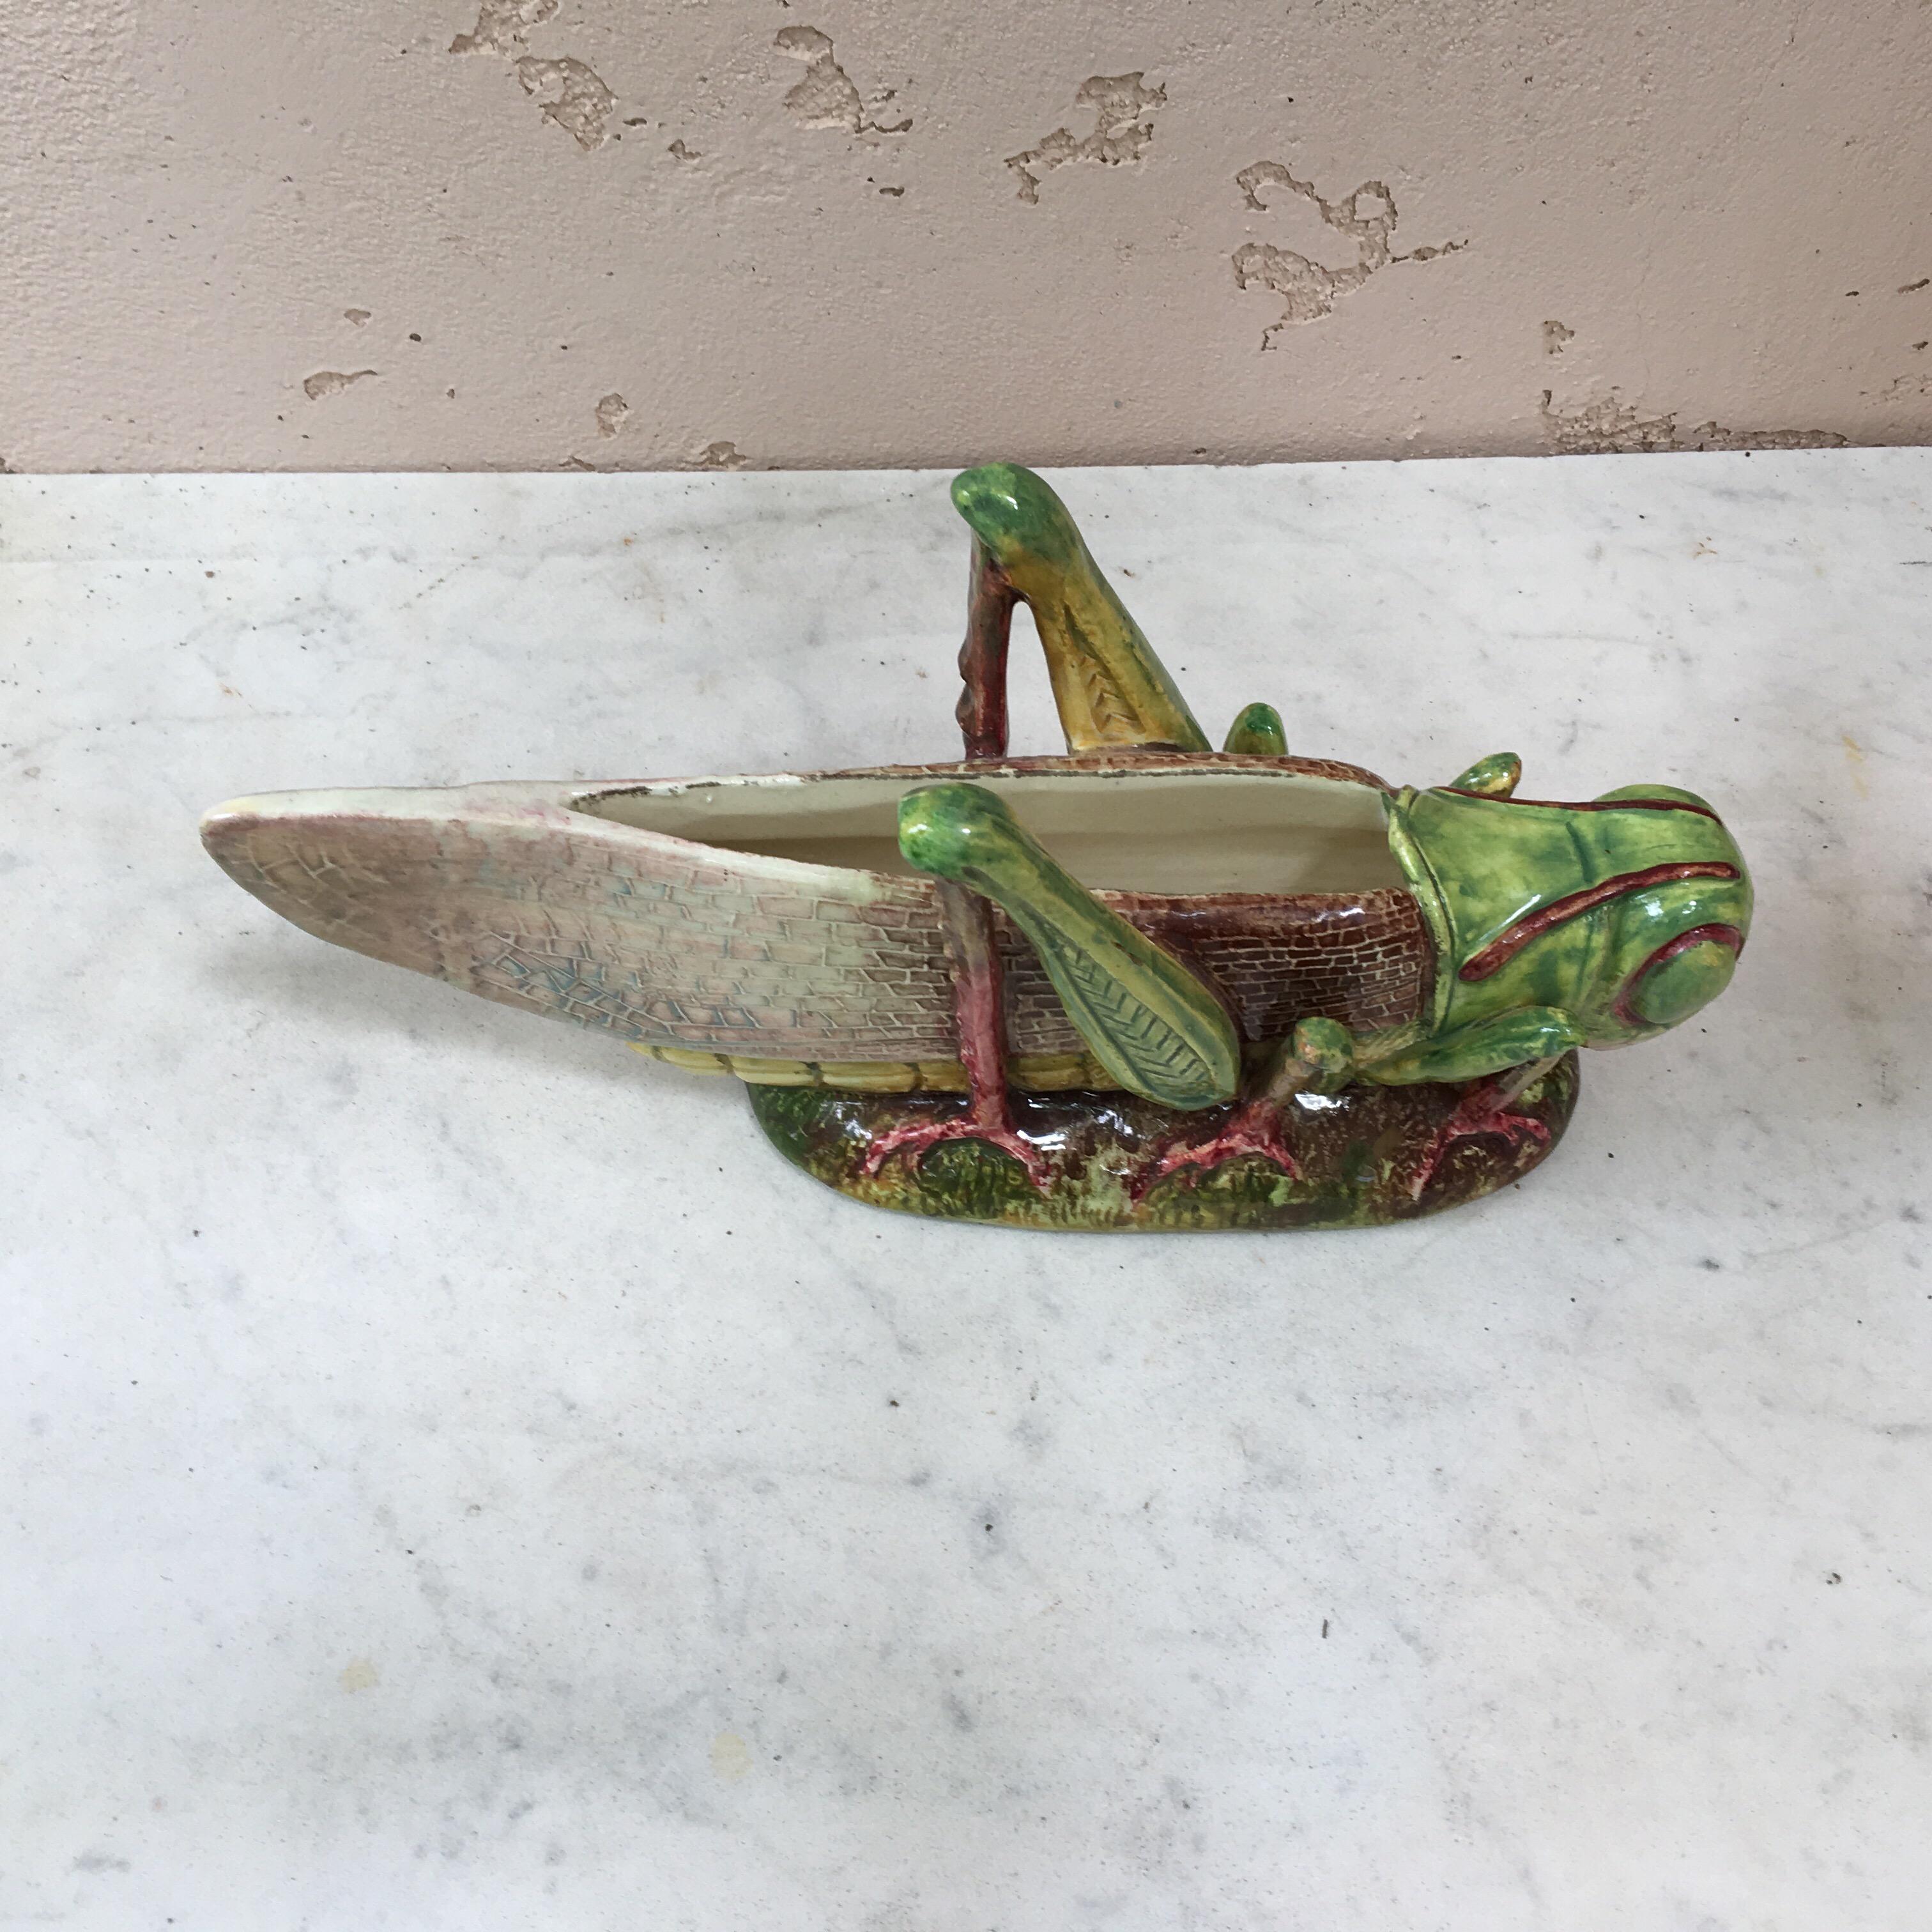 Rare Majolica grasshopper jardinière signed Jerome Massier Fils, circa 1890.
This grasshopper is a medium size.
At the end of 19th century The Massier manufacture participated at the Universal Exhibitions and earned several prices. This piece is a